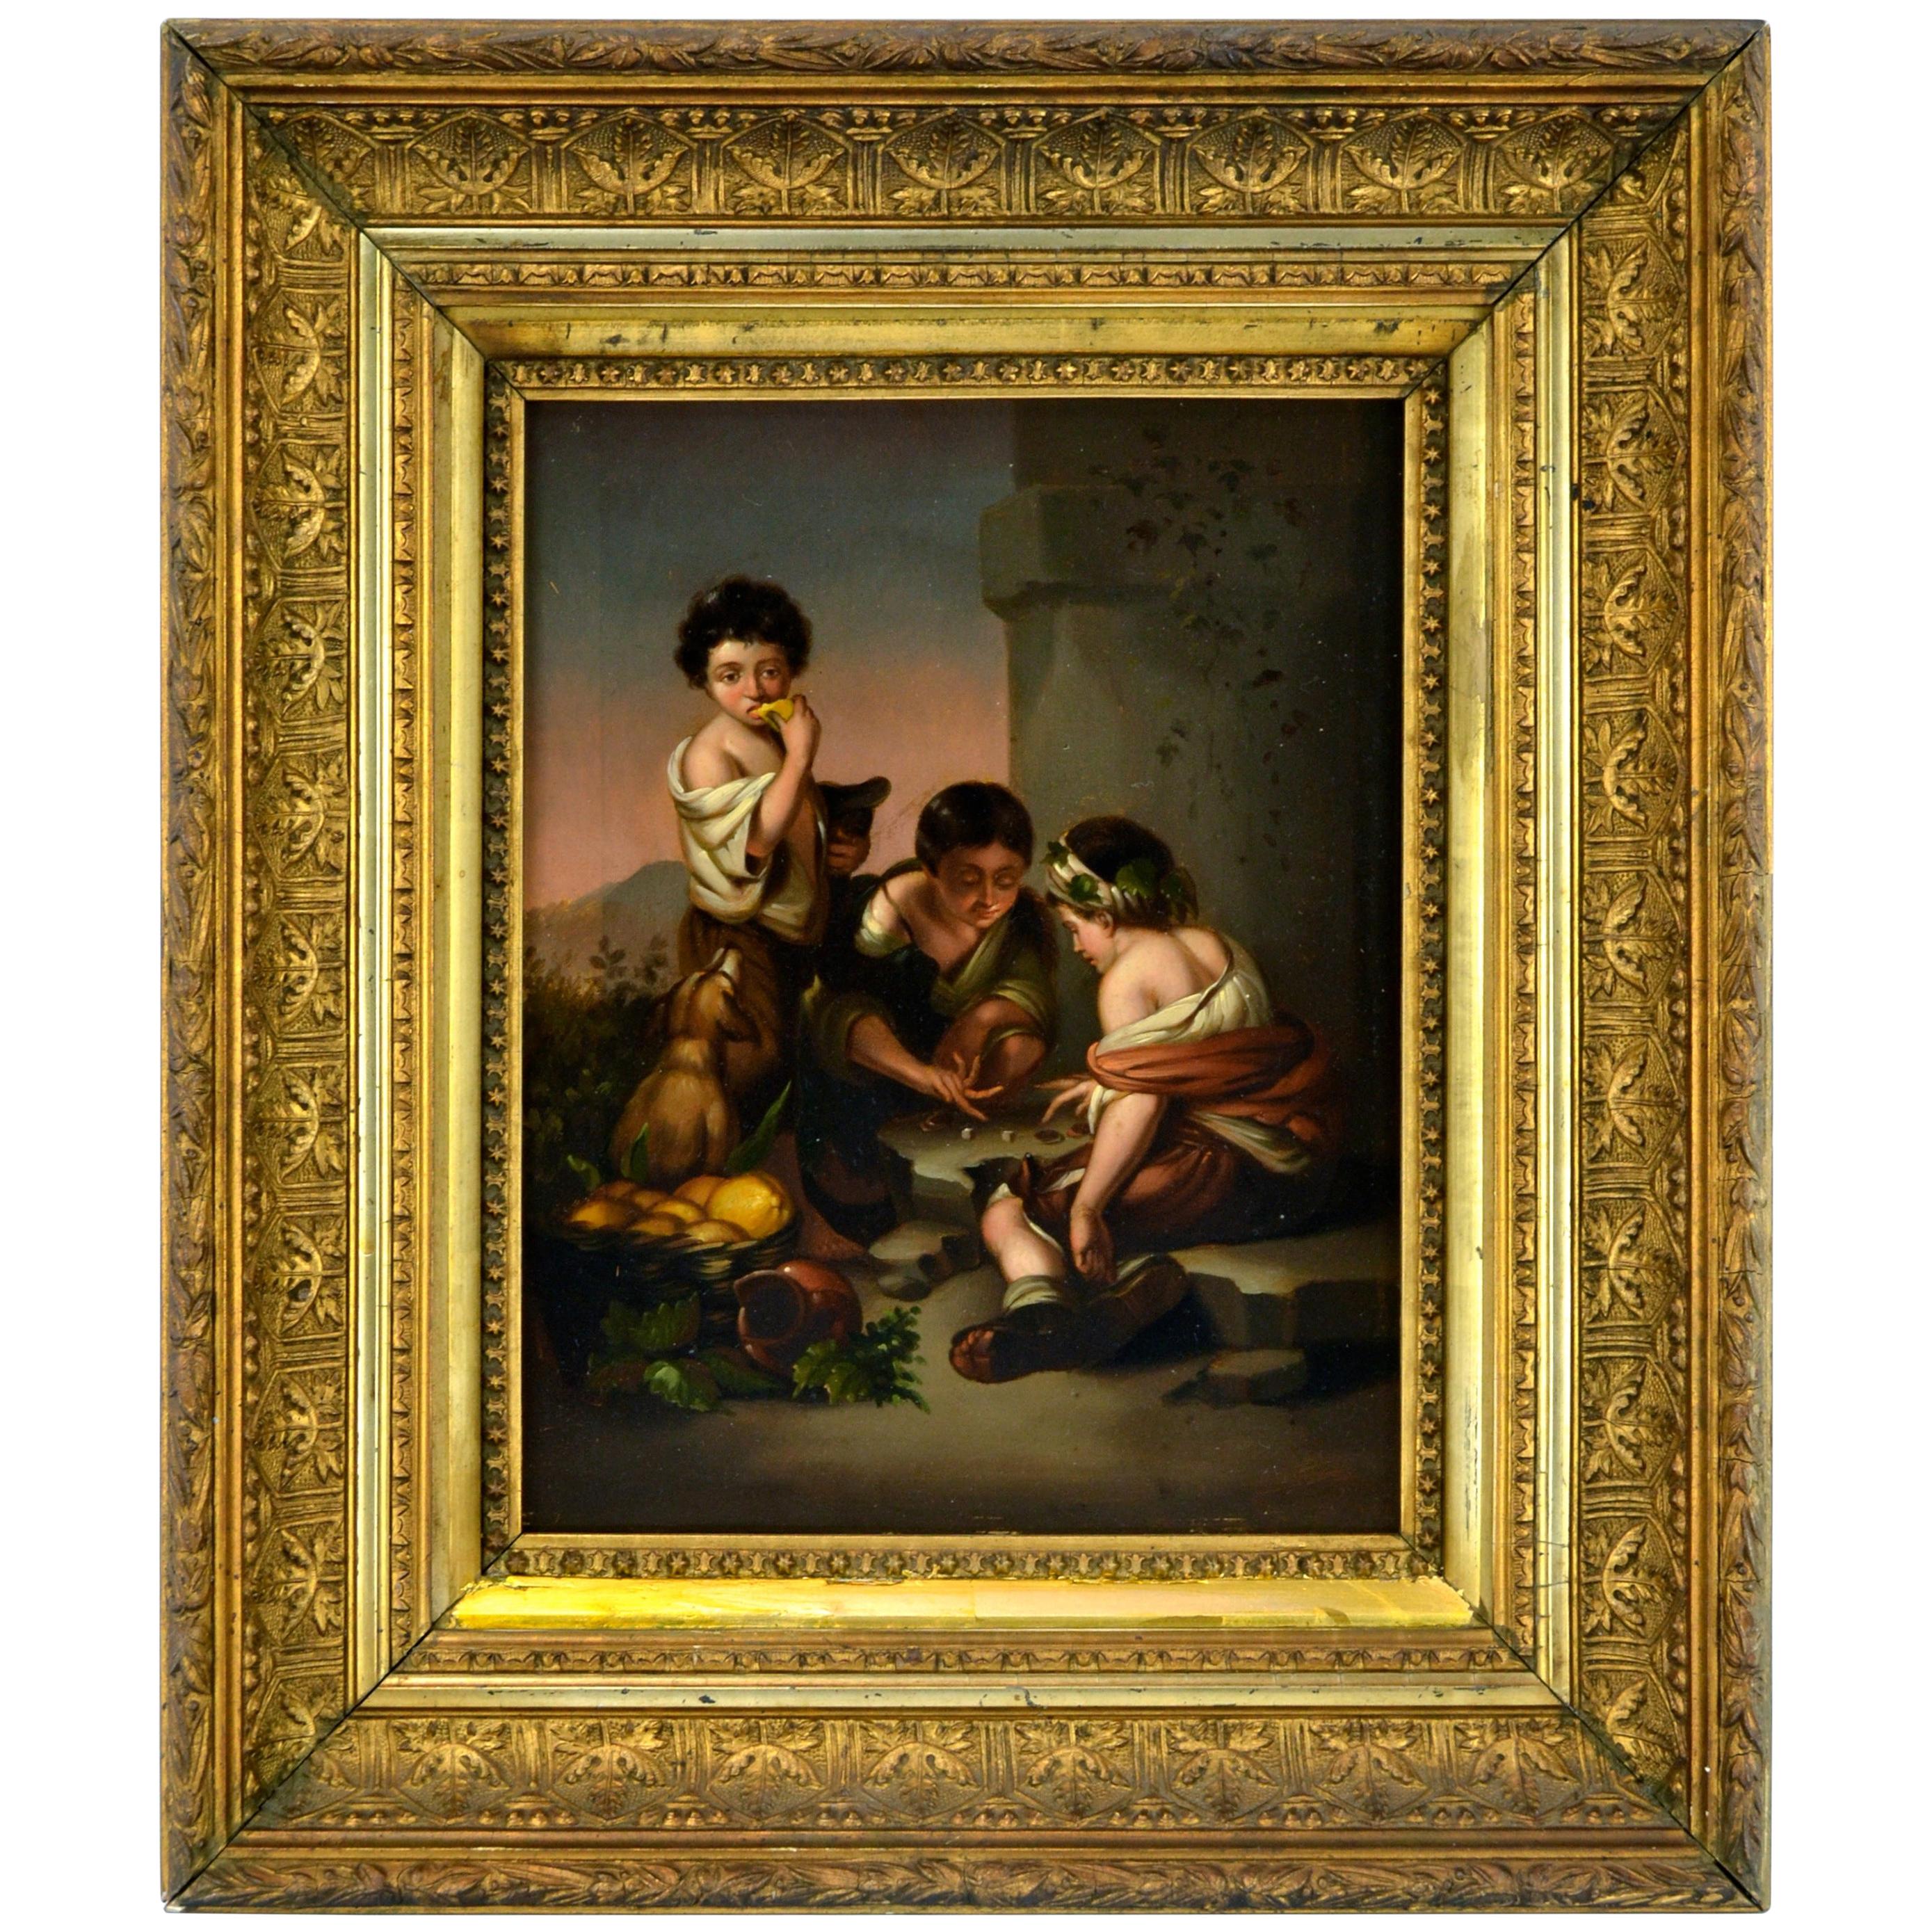 Small Painting Titled ��“Boys Playing Dice” after Bartolomé Esteban Murillo